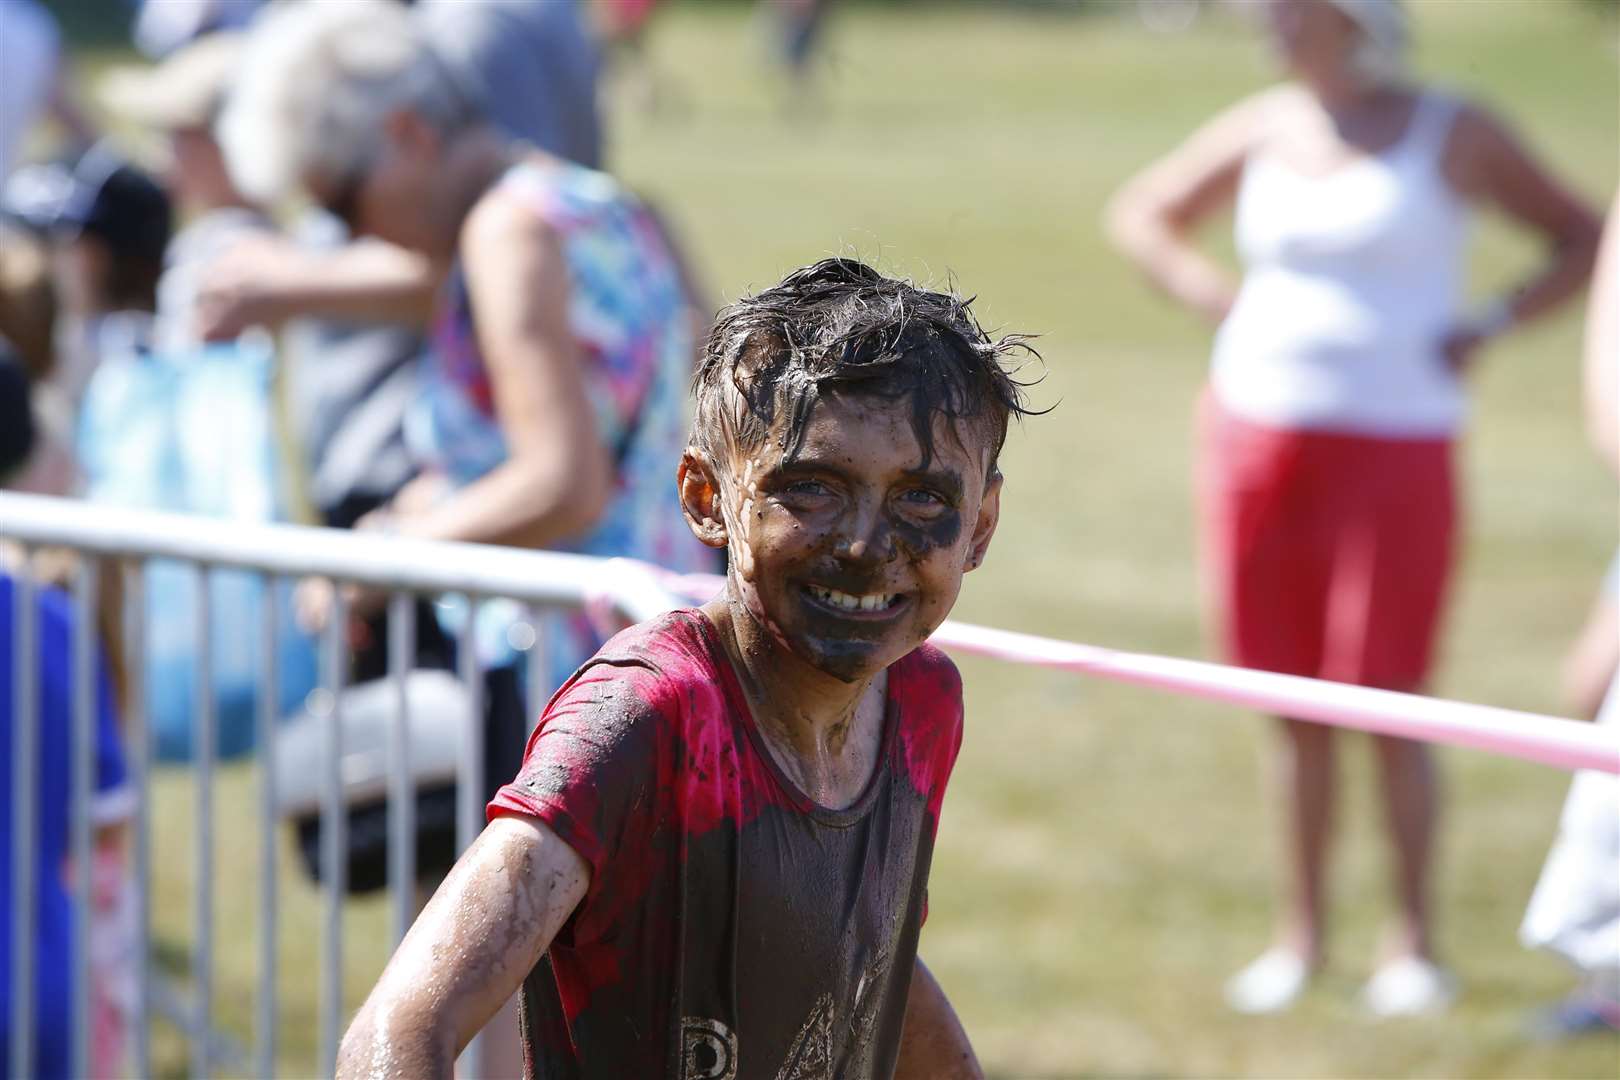 Hundreds of children got muddy and had a great day for Cancer Research UK